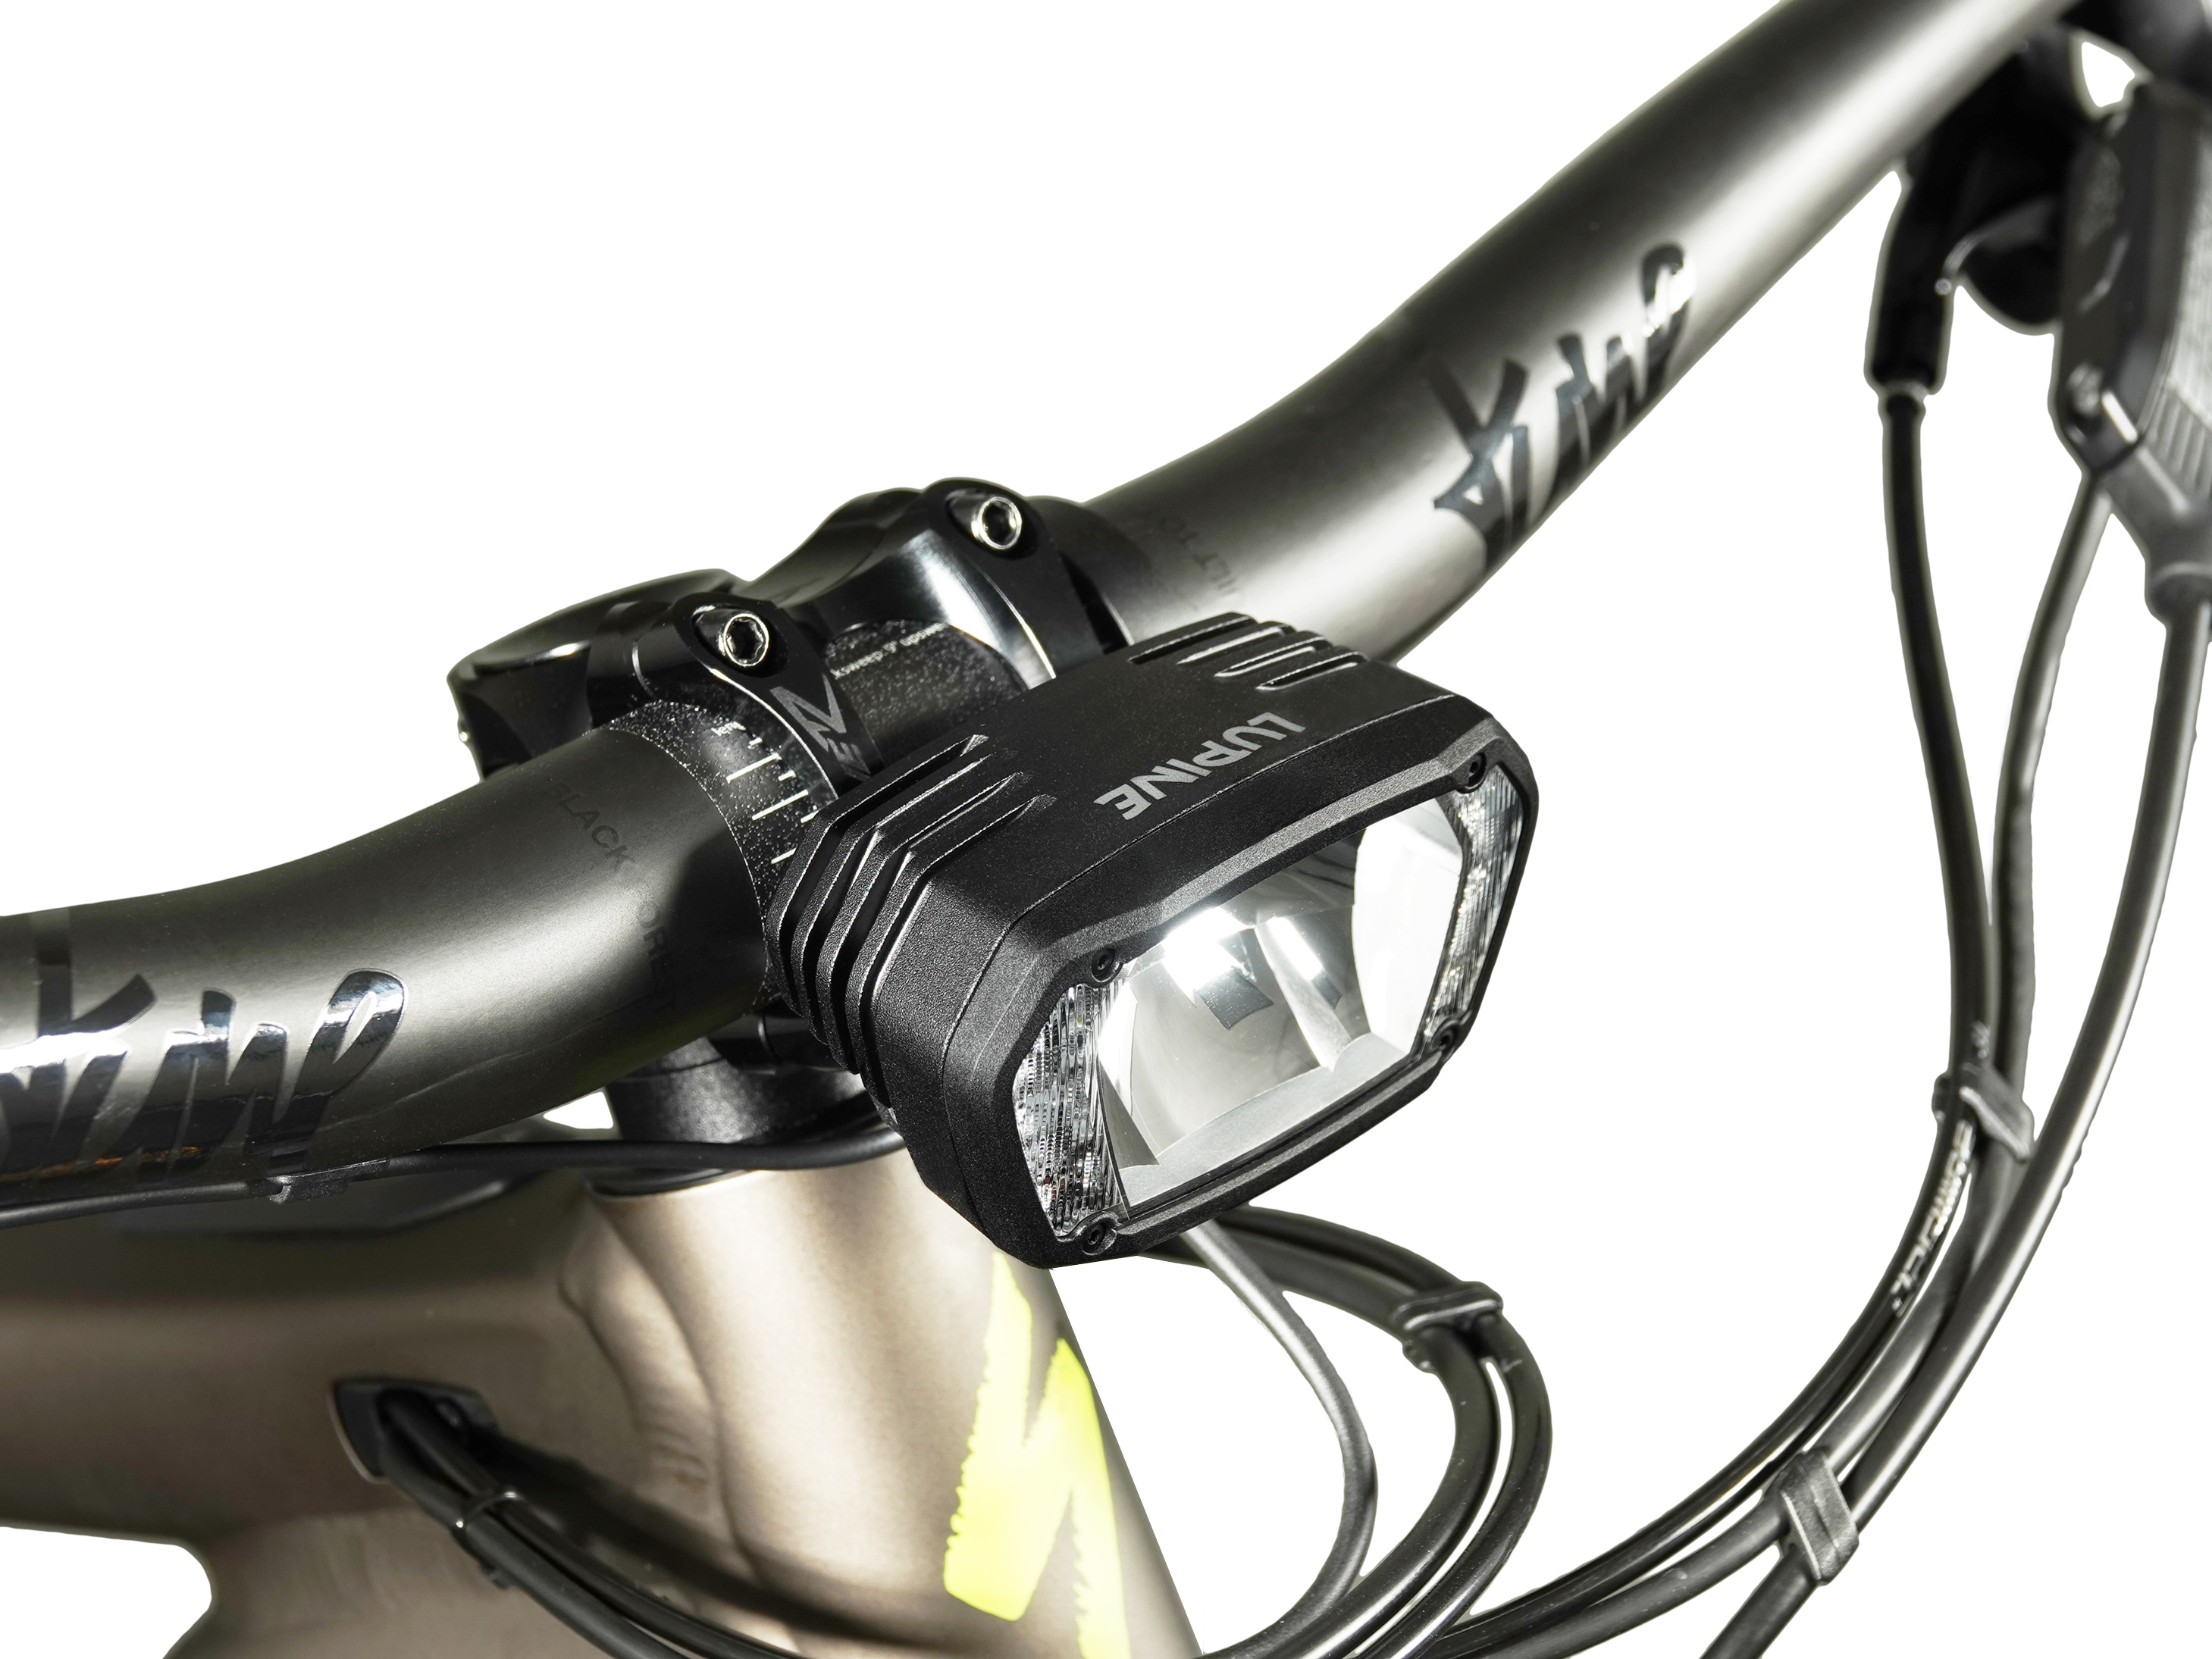 Lupine SL X - the high-performance Hi-beam - for with Bosch, Brose, or Shimano drive systems - Lupine Lighting Systems